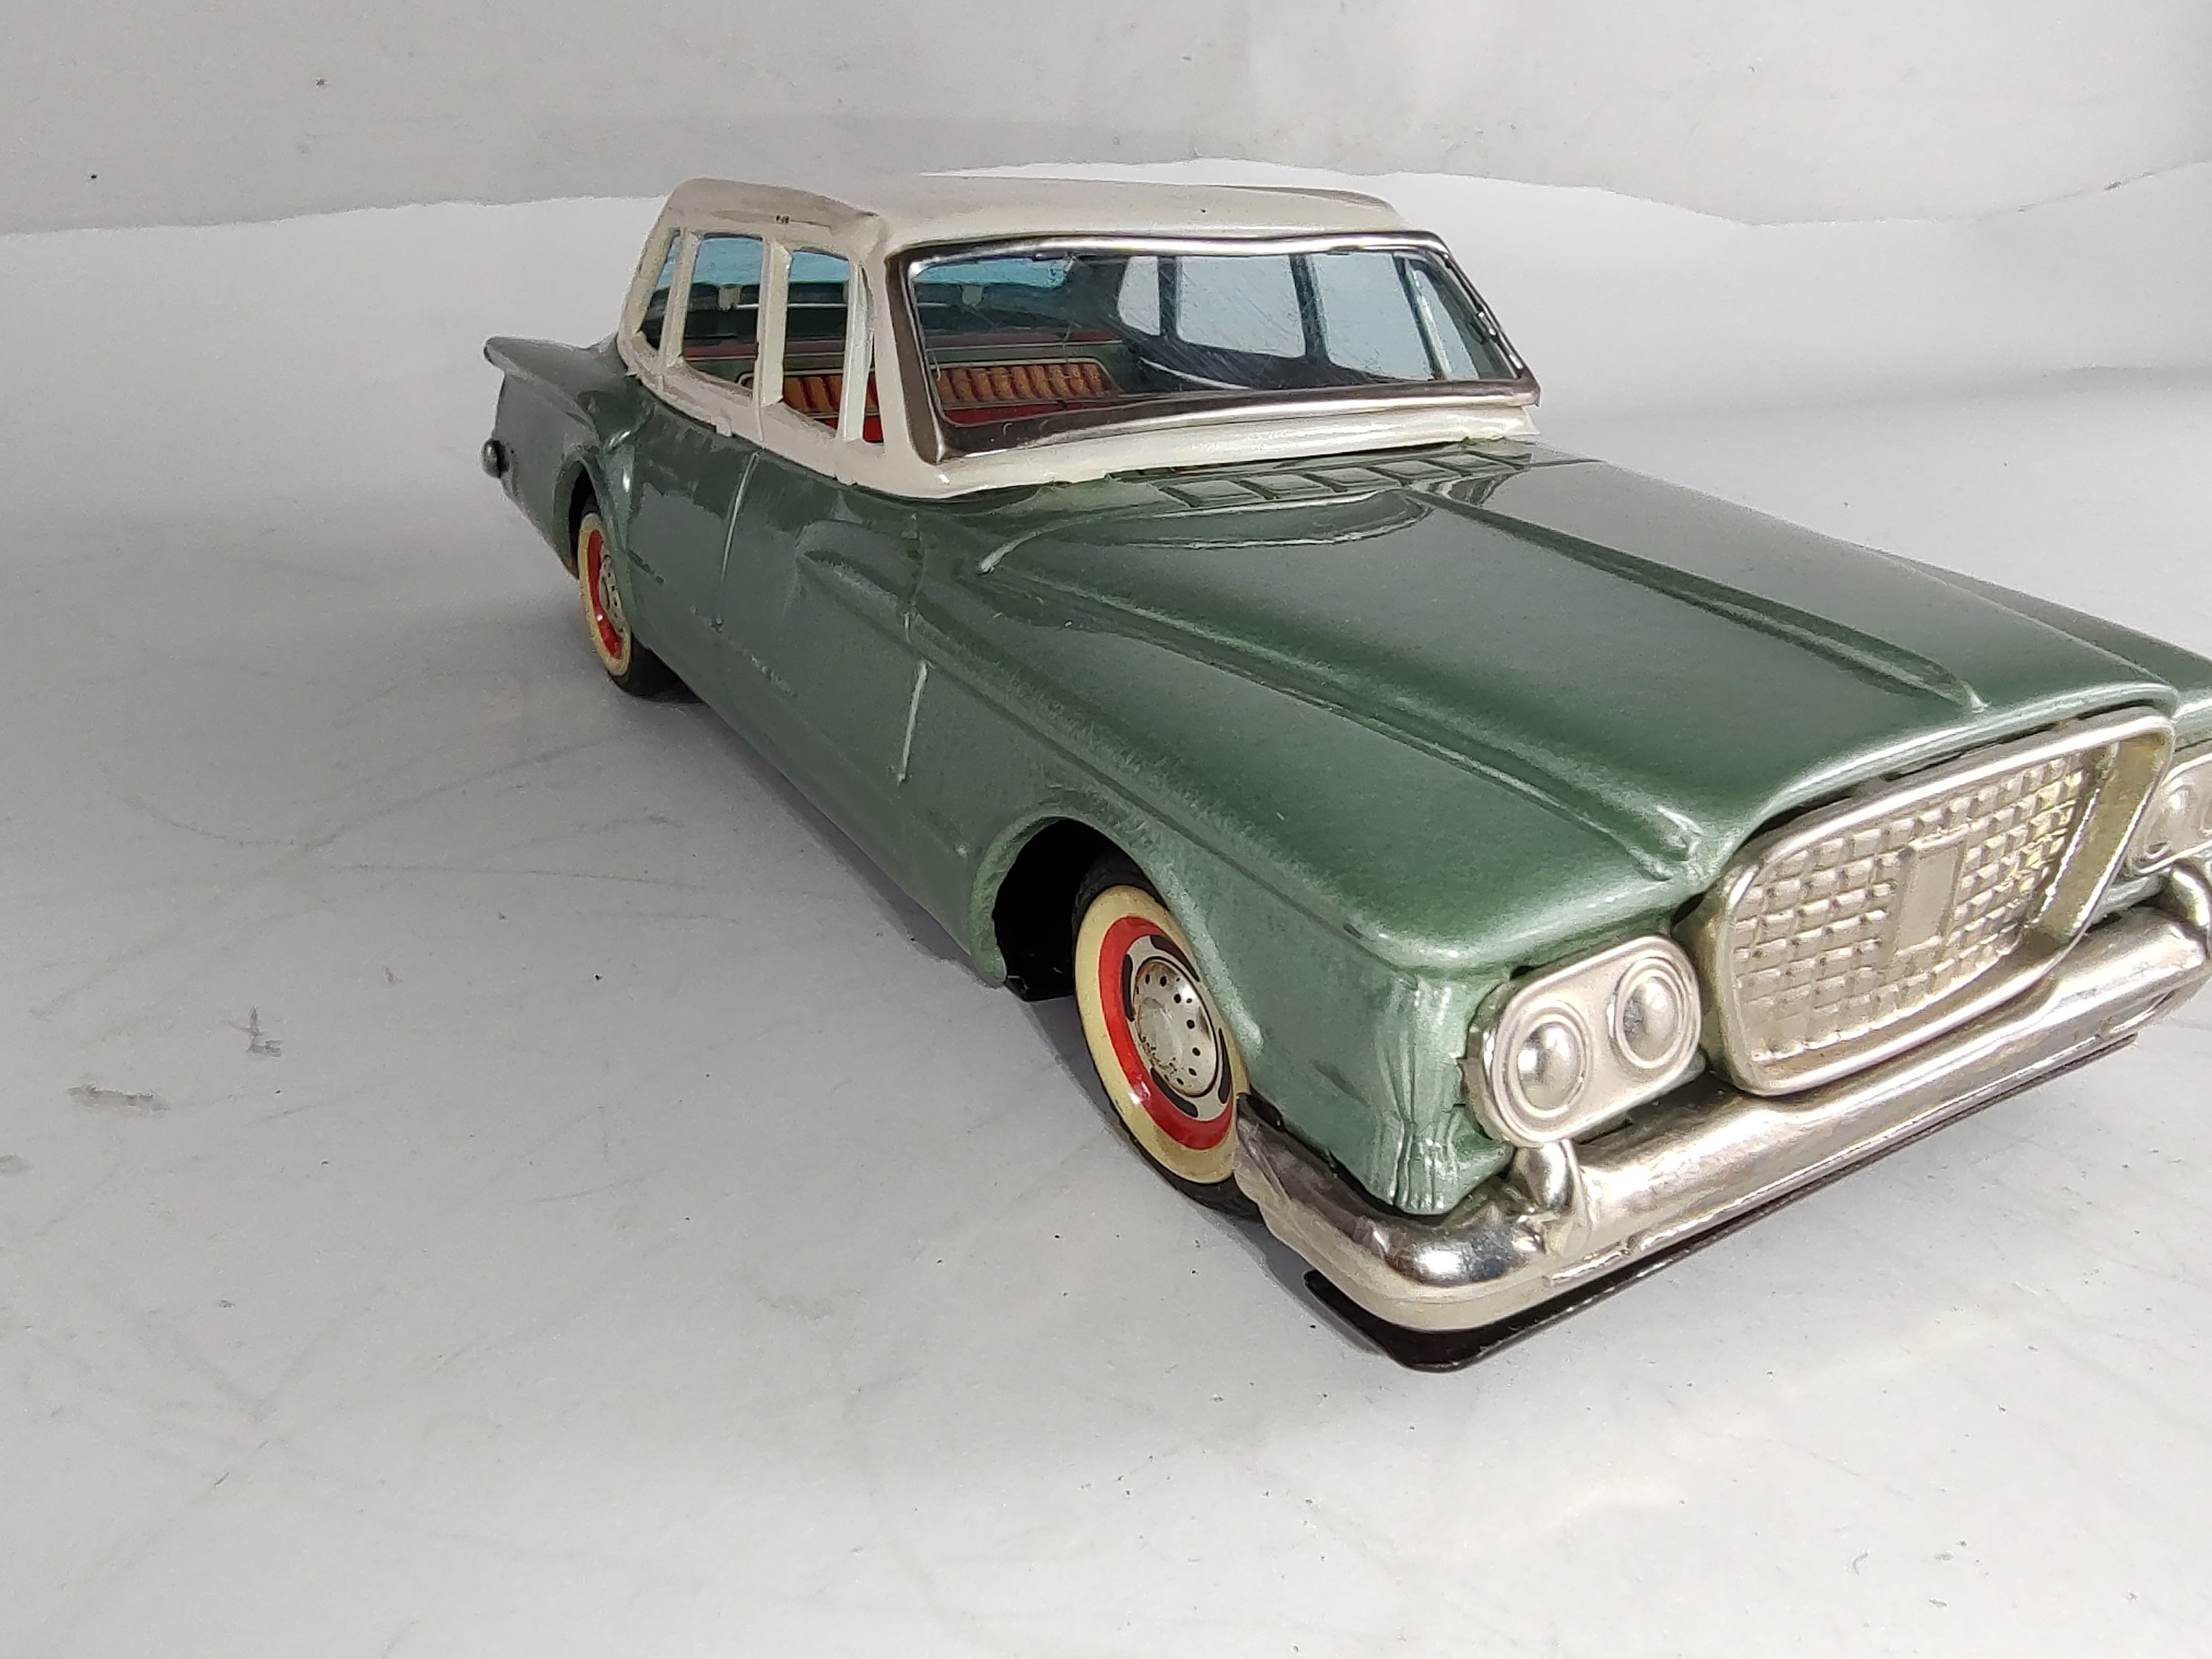 Industrial Midcentury Japanese Tin Litho Toy Plymouth Valiant, circa 1962 For Sale